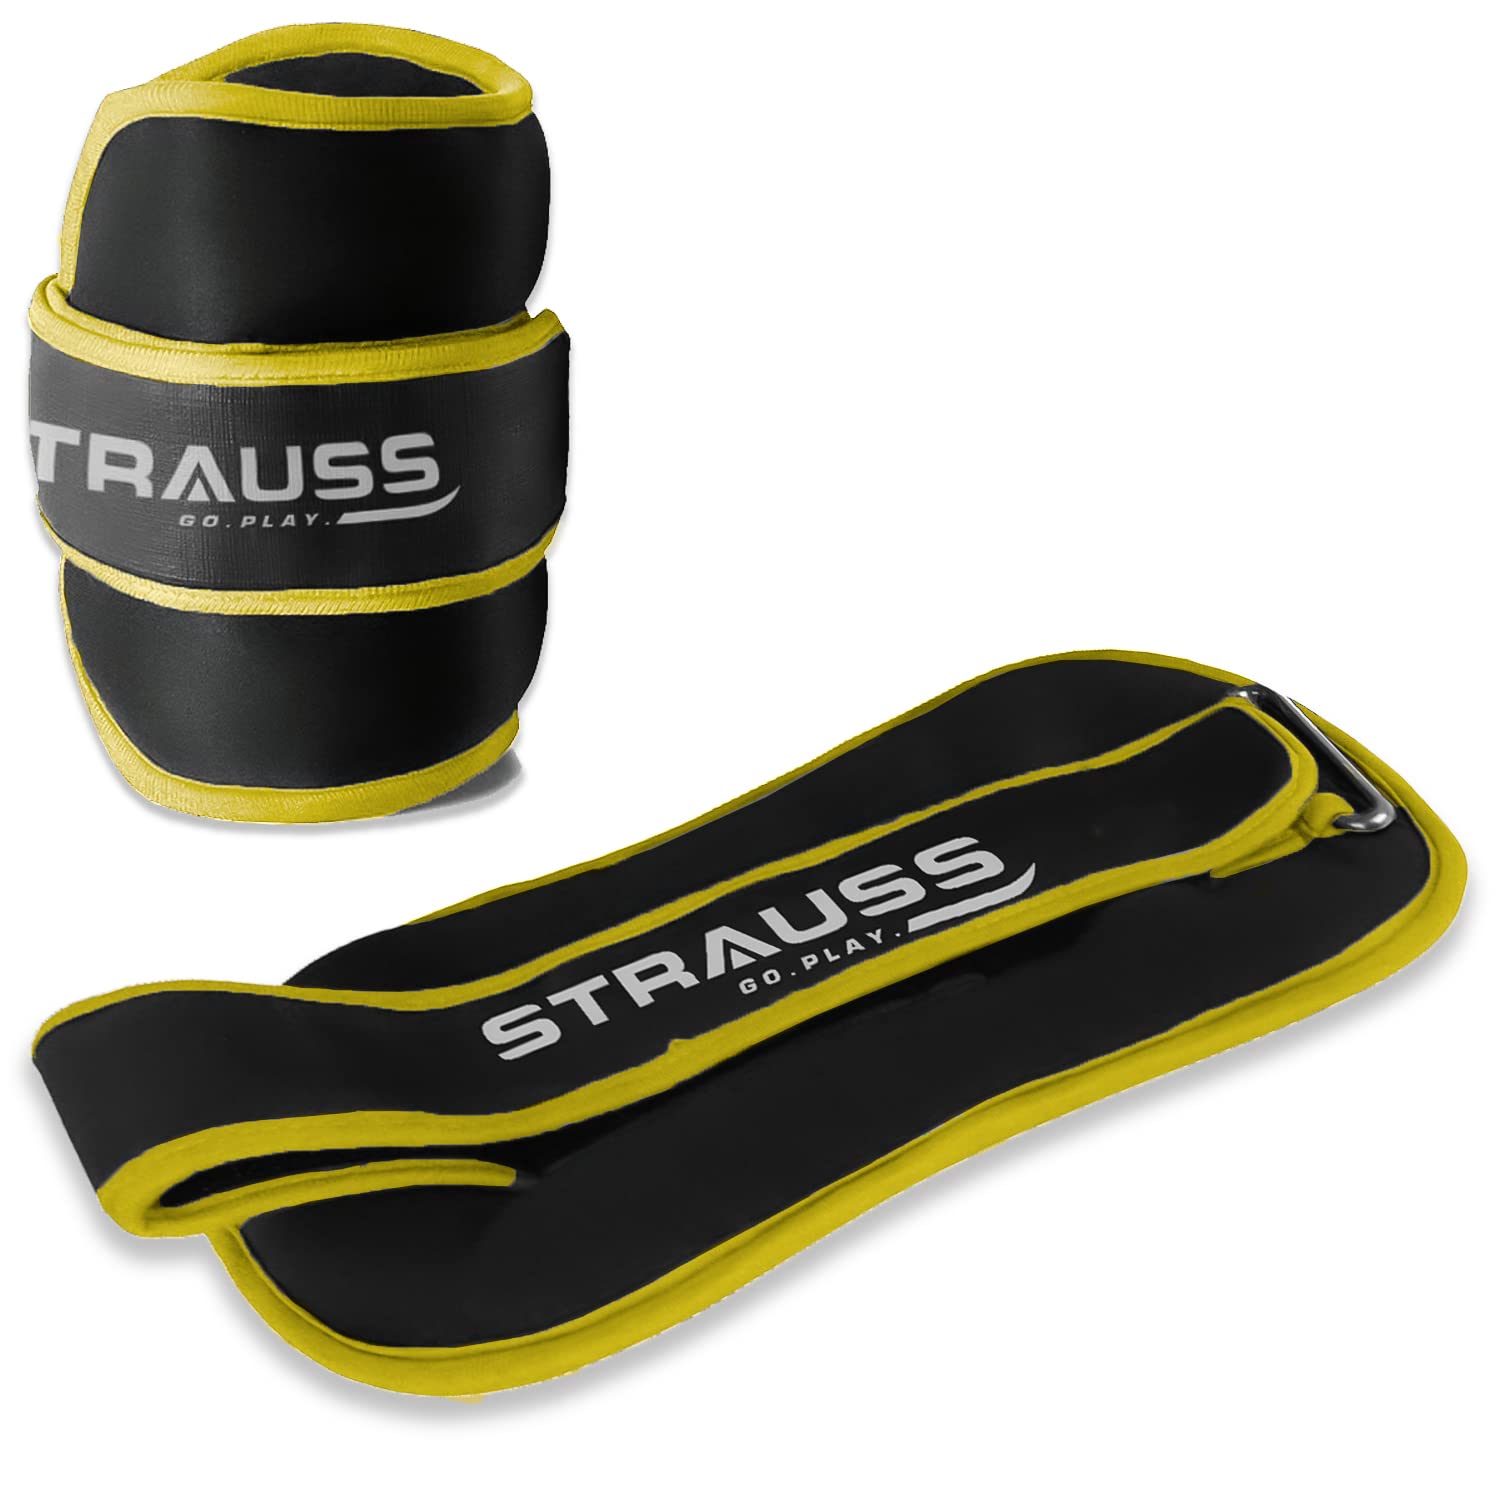 Strauss Round Shape Ankle Weight, 1.5 Kg (Each), Pair, (Yellow)